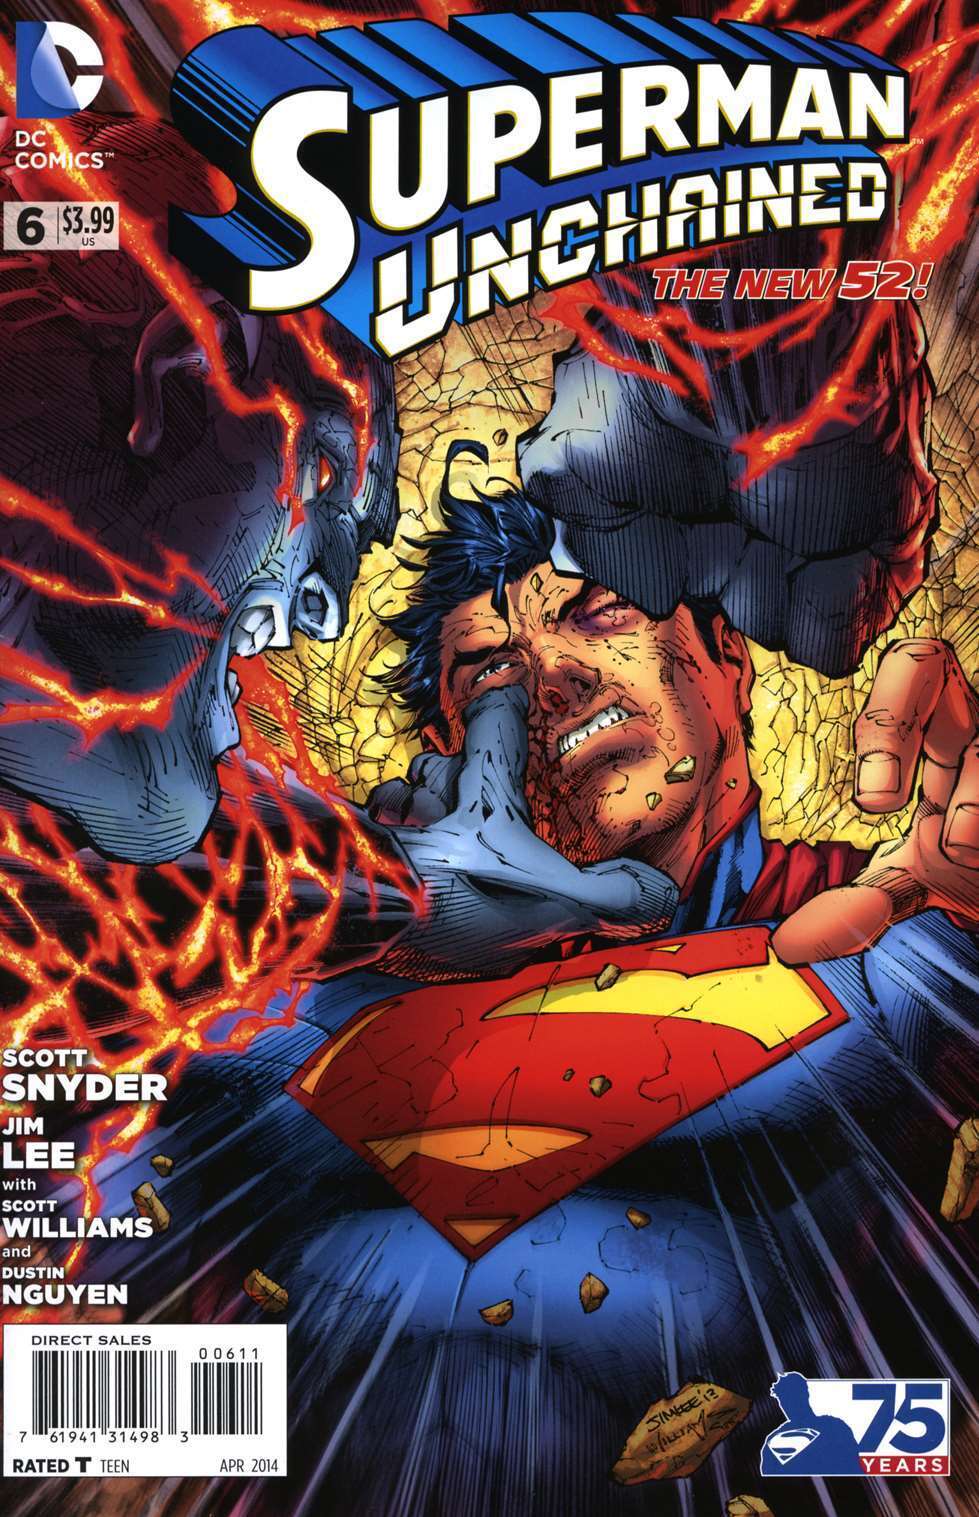 Superman Unchained #6 VF/NM; DC | New 52 - we combine shipping